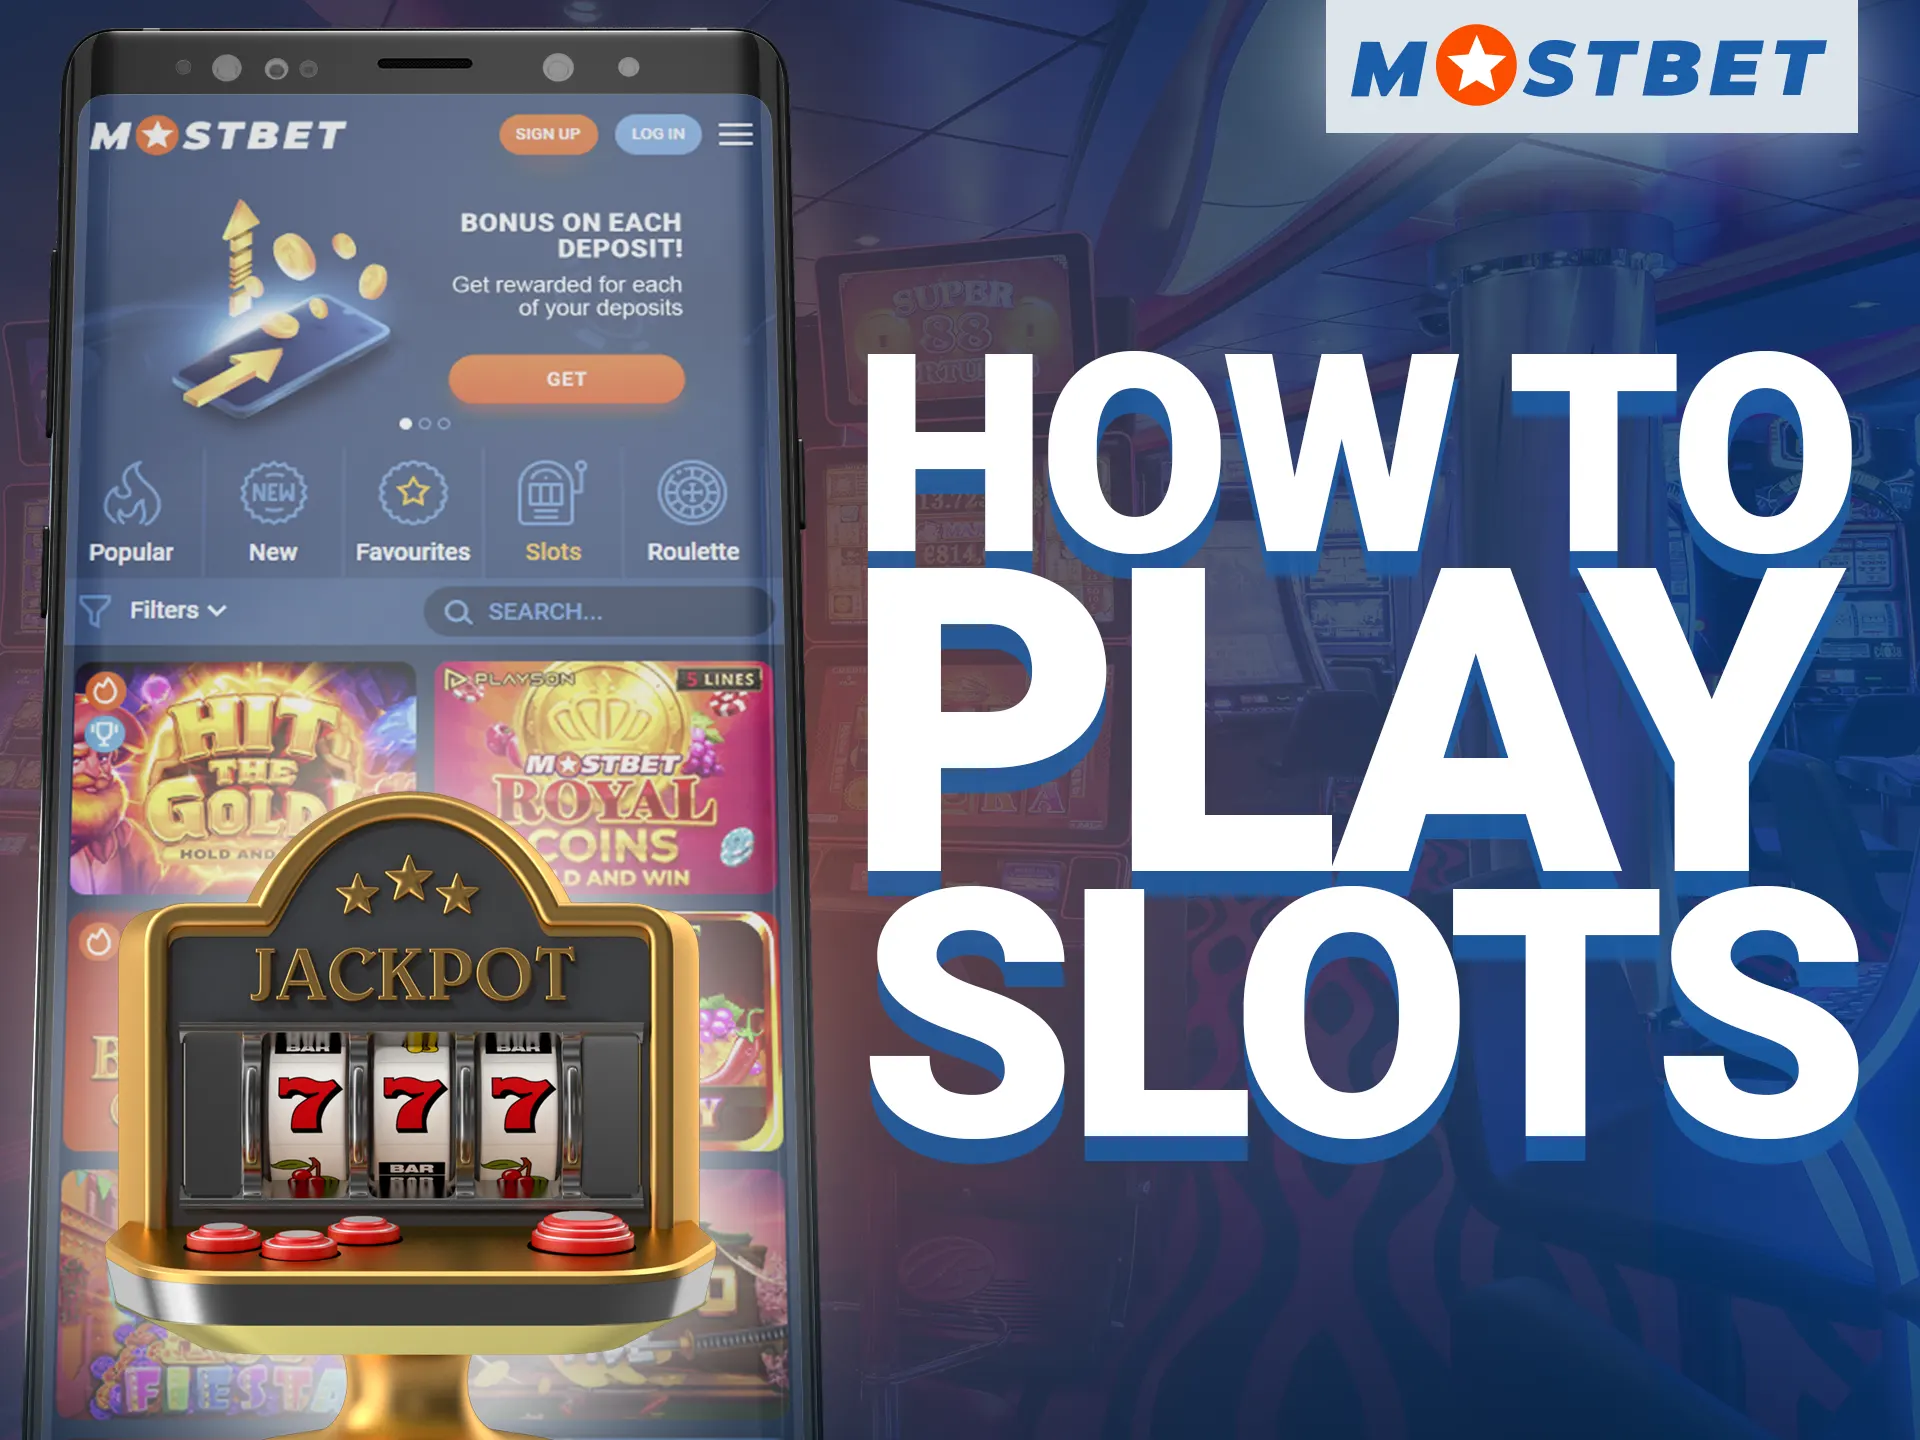 Follow the steps below and play slots.